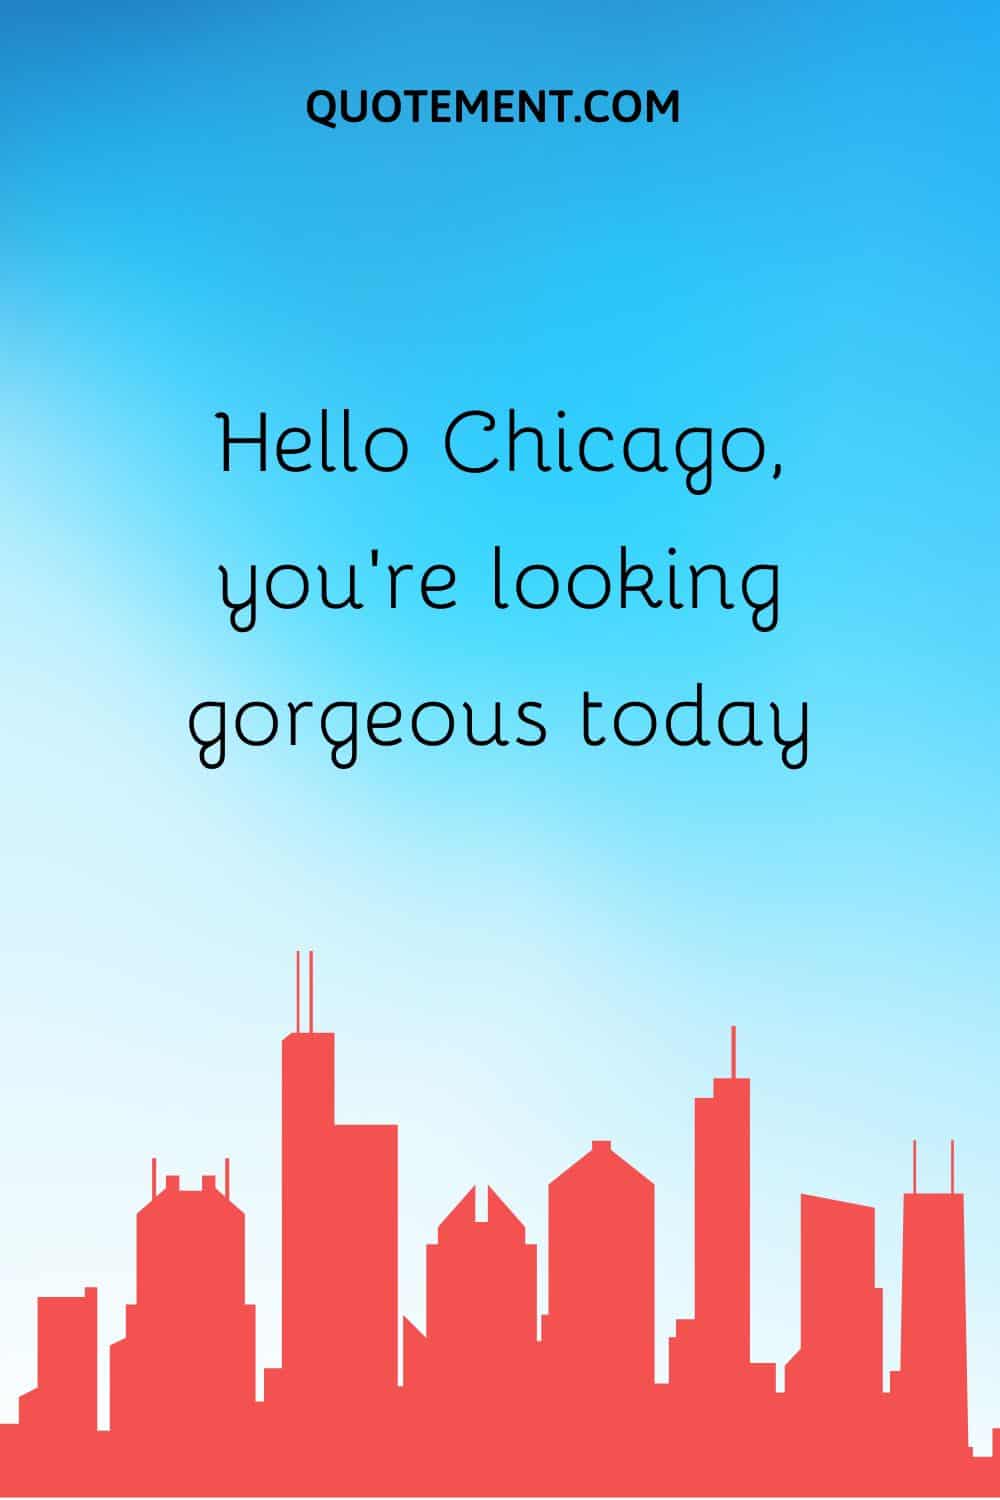 Hello Chicago, you’re looking gorgeous today.